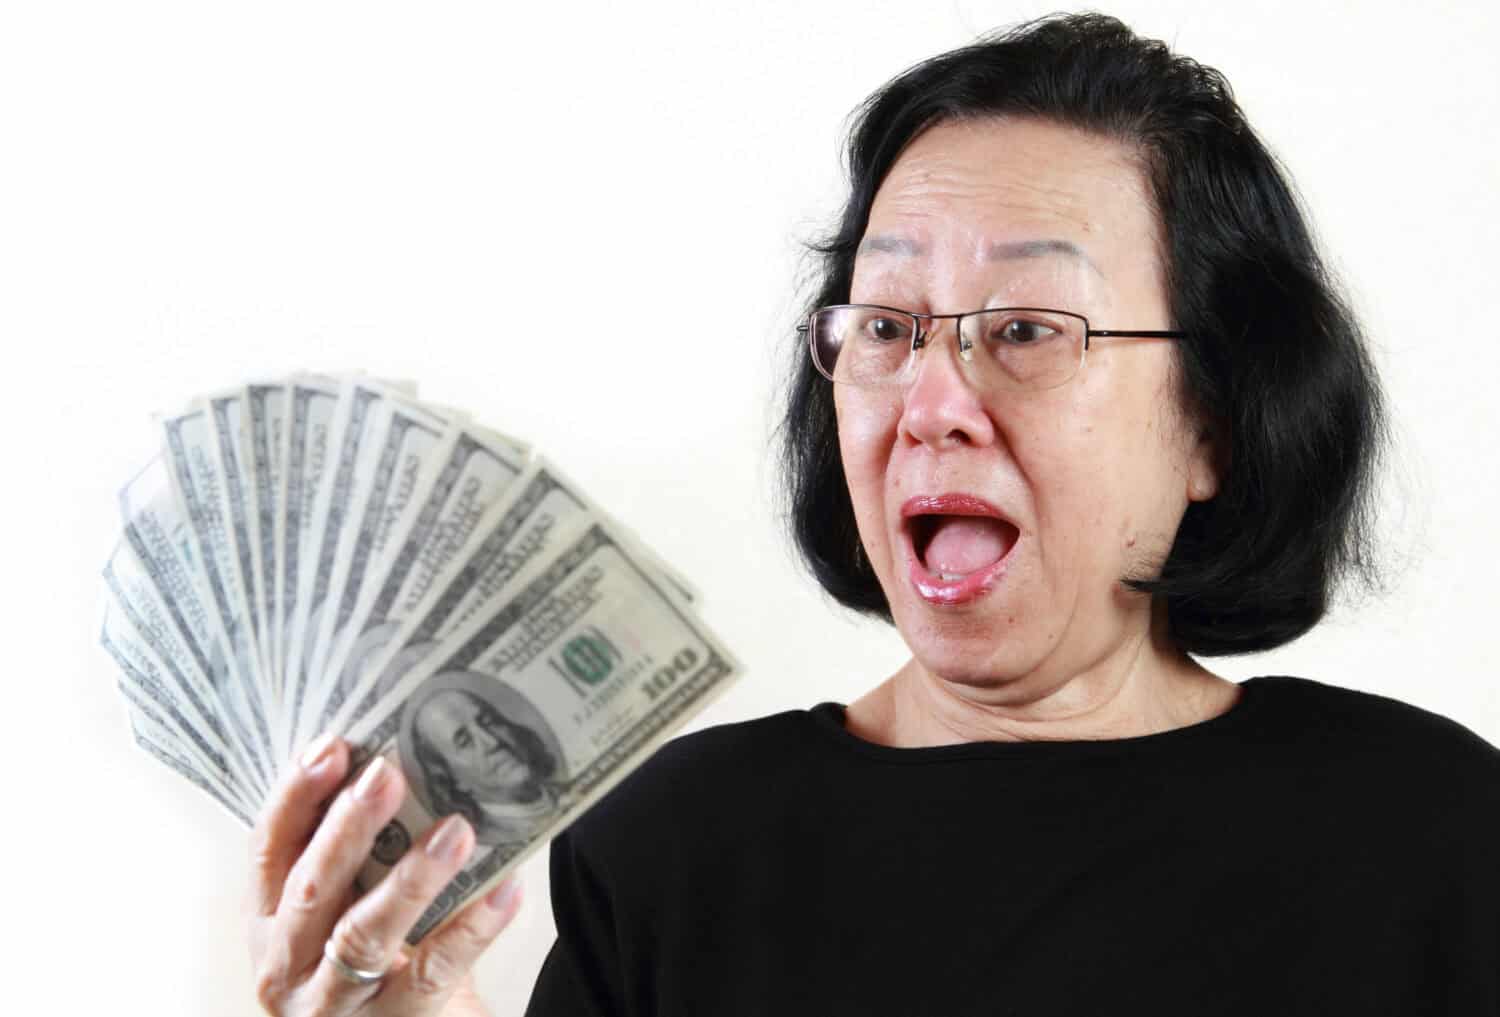 Asian lady holding a bunch of $100 bills with surprised facial expression